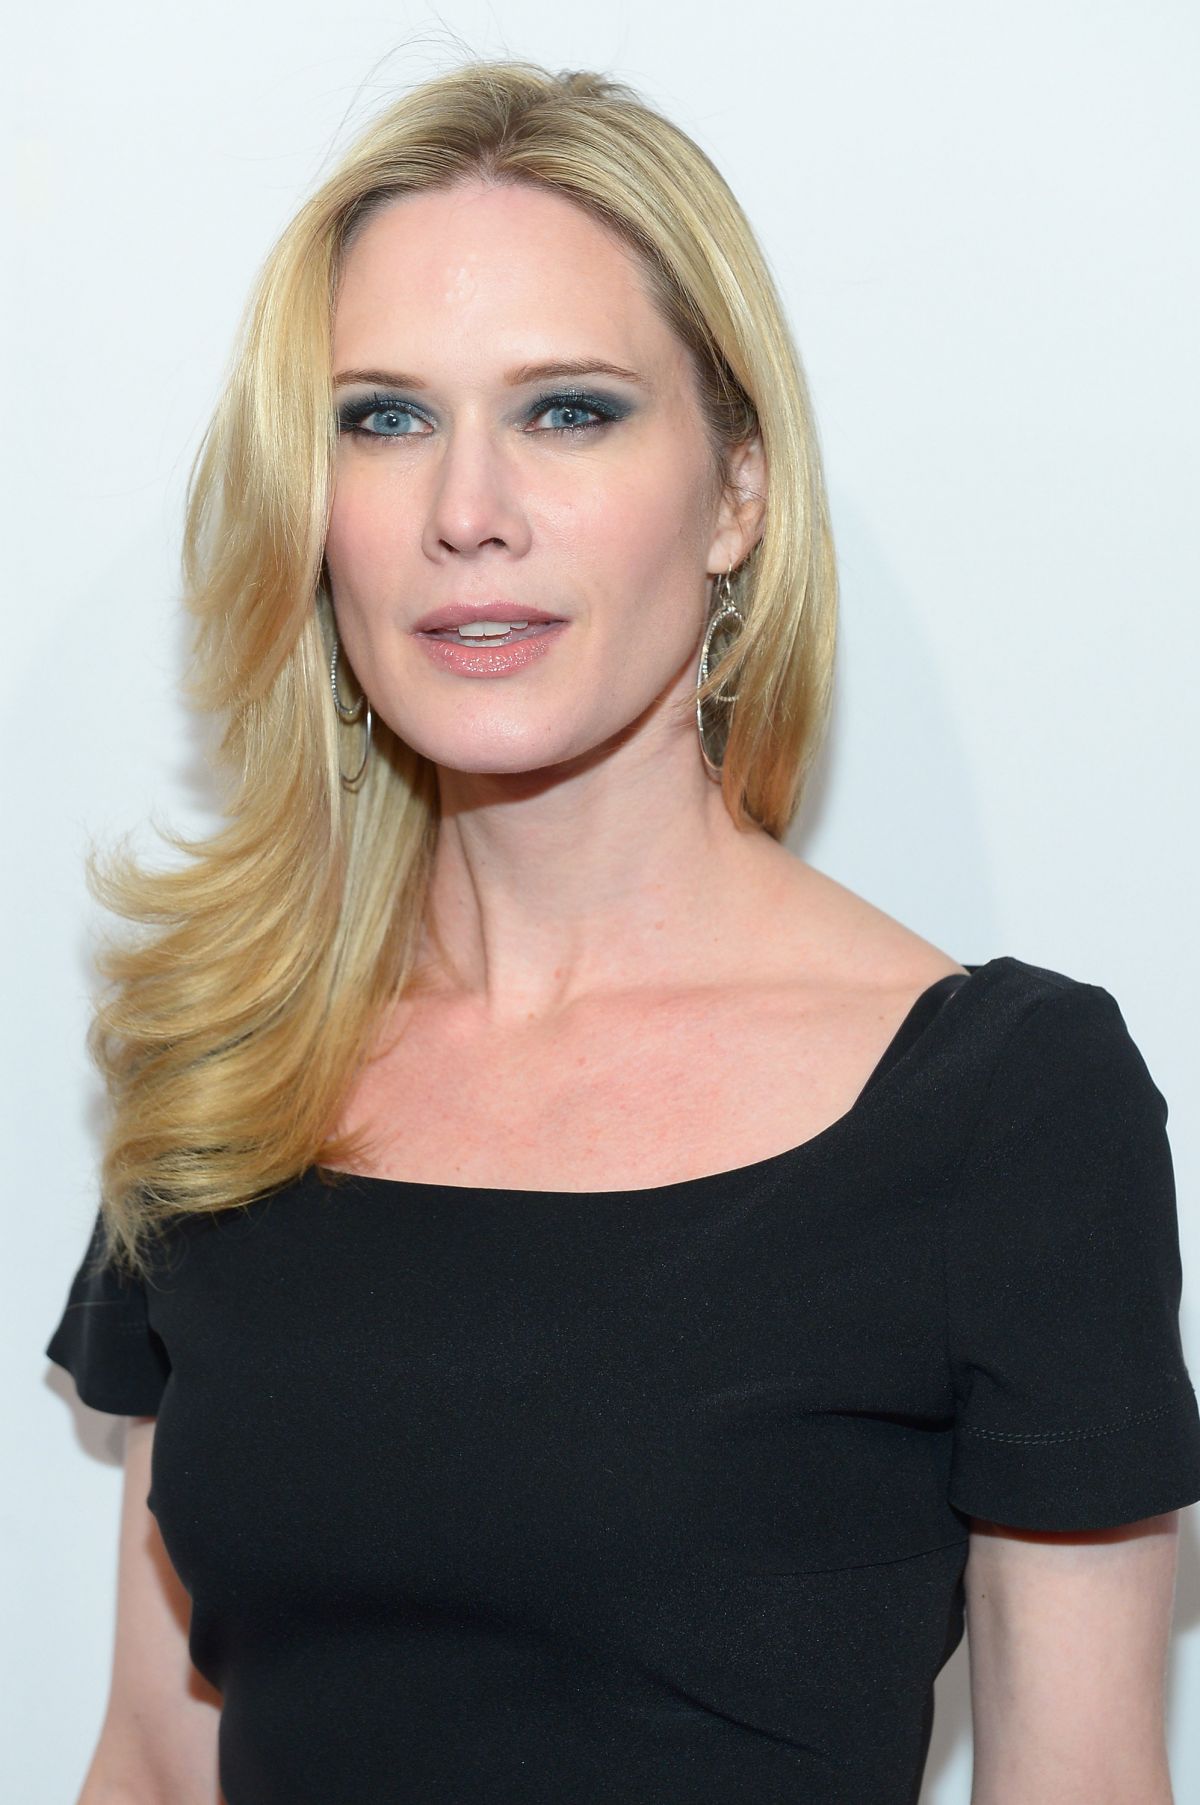 STEPHANIE MARCH at The American Season 2 Premiere in New York